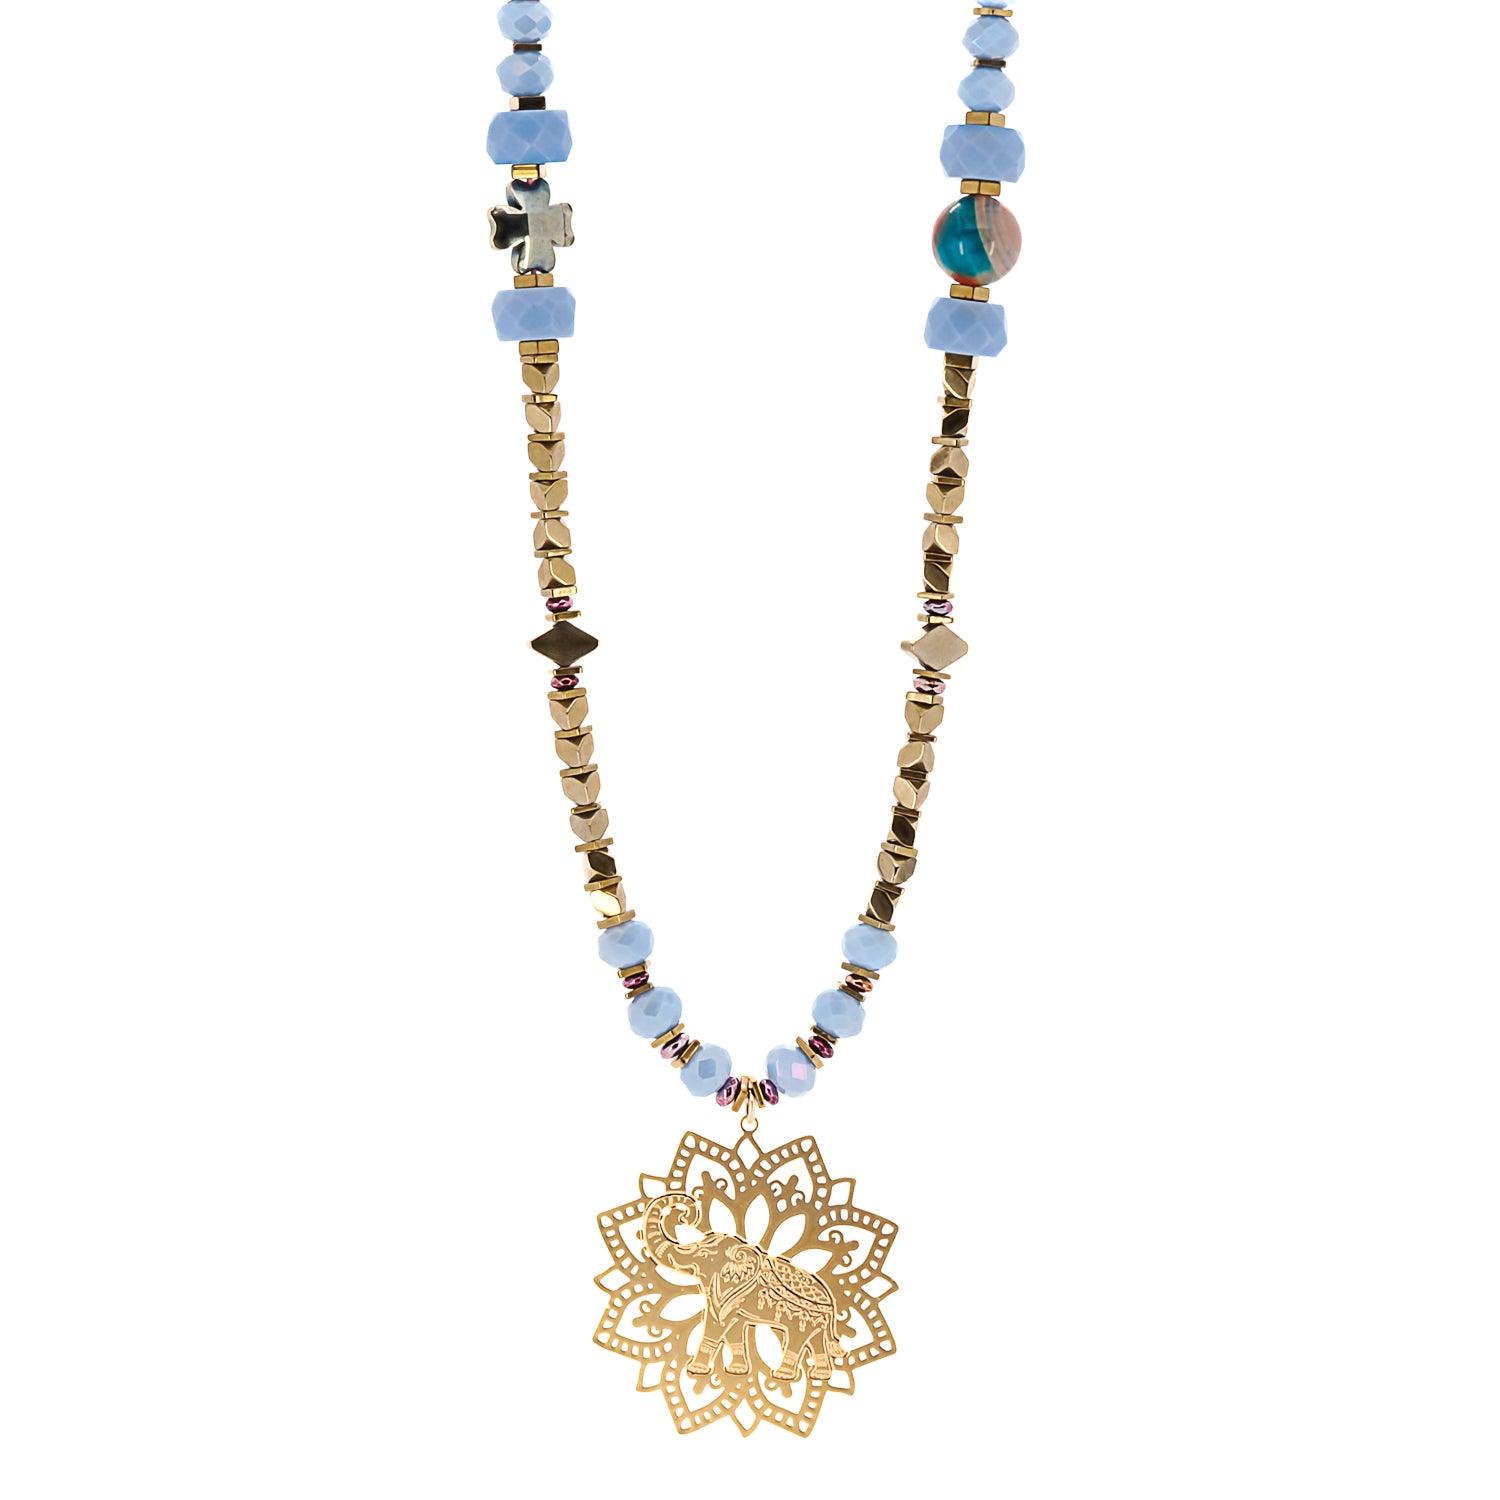 Blue Magic Gold Elephant Necklace showcasing the intricate design and combination of blue crystal beads, gold-colored hematite stone beads, and the 18K gold plated elephant pendant.